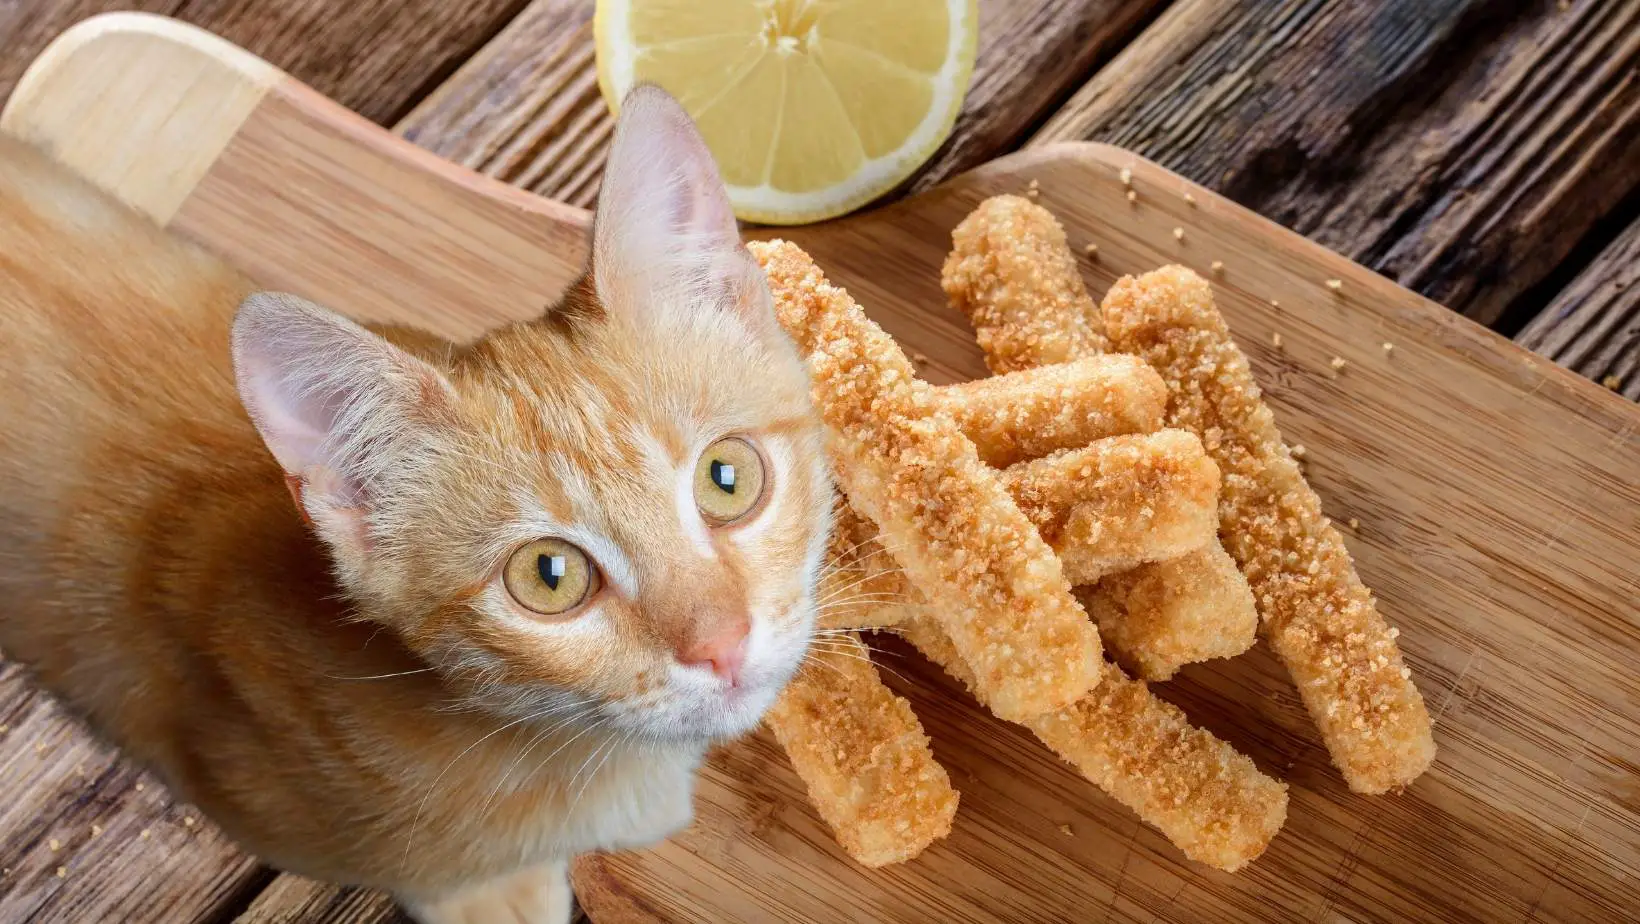 Can Cats Eat Fish Sticks?